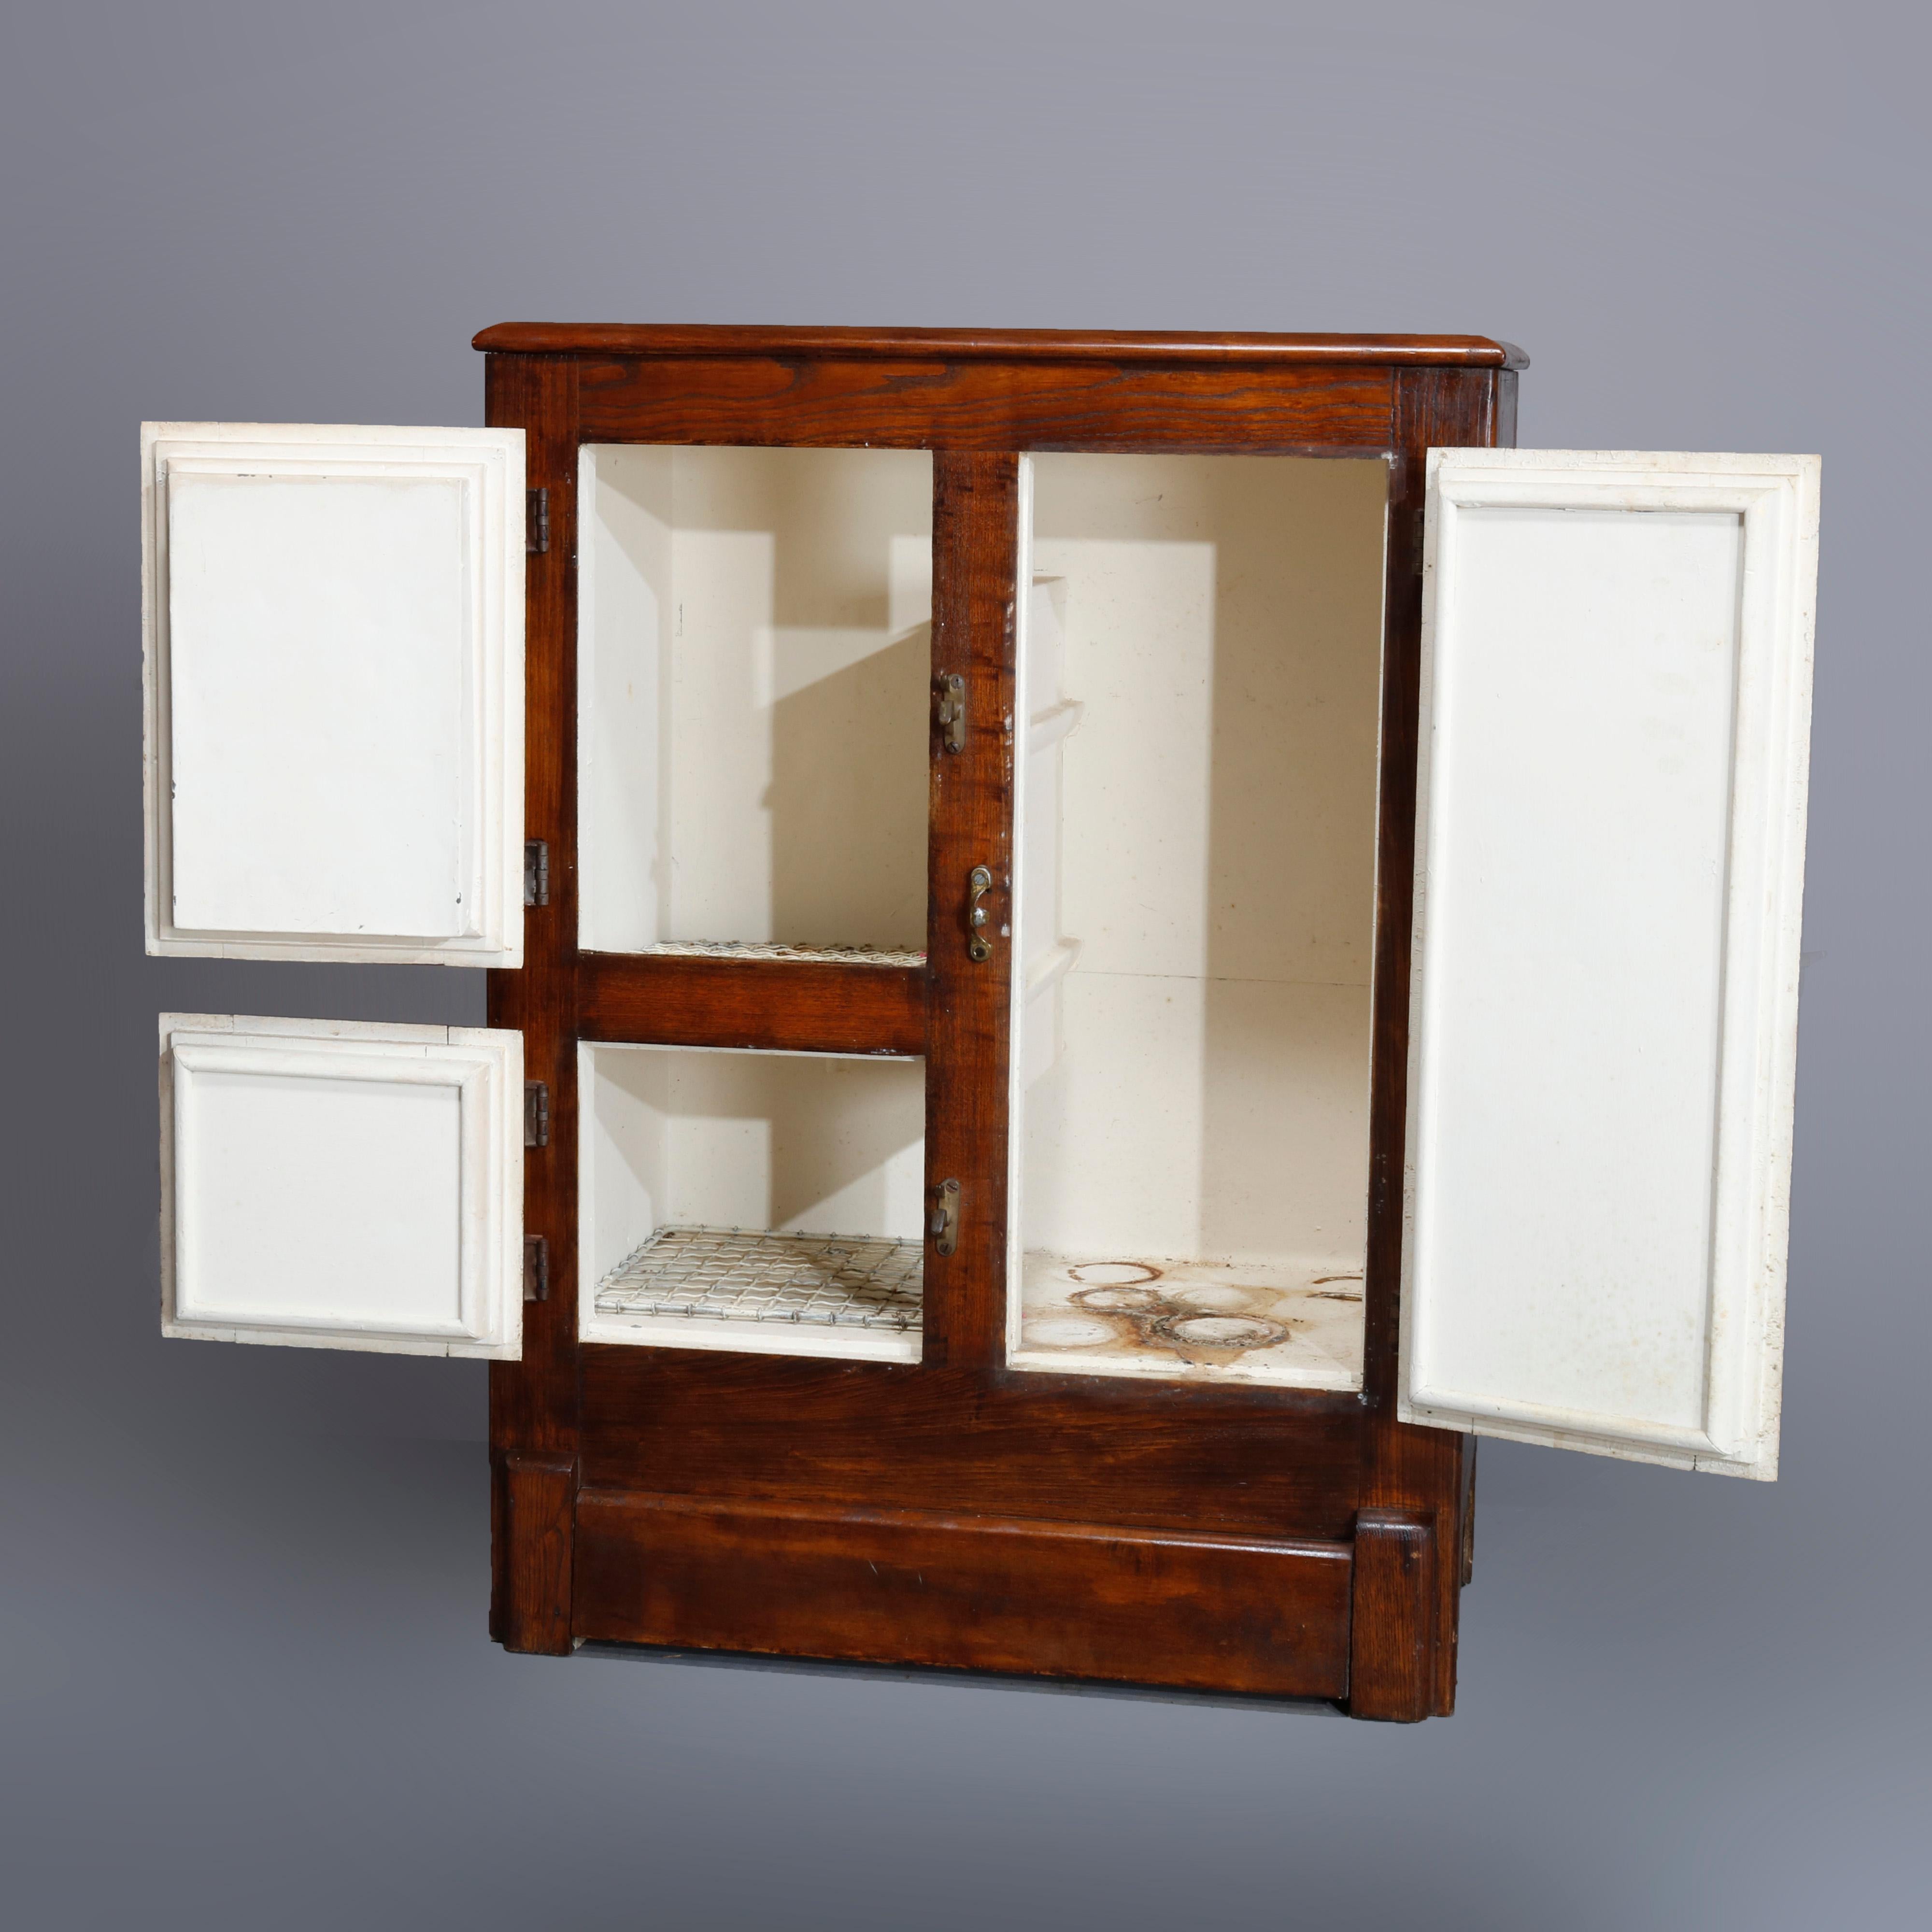 An antique diminutive ice box offers paneled oak construction with three doors, circa 1900

Measures- 36.18